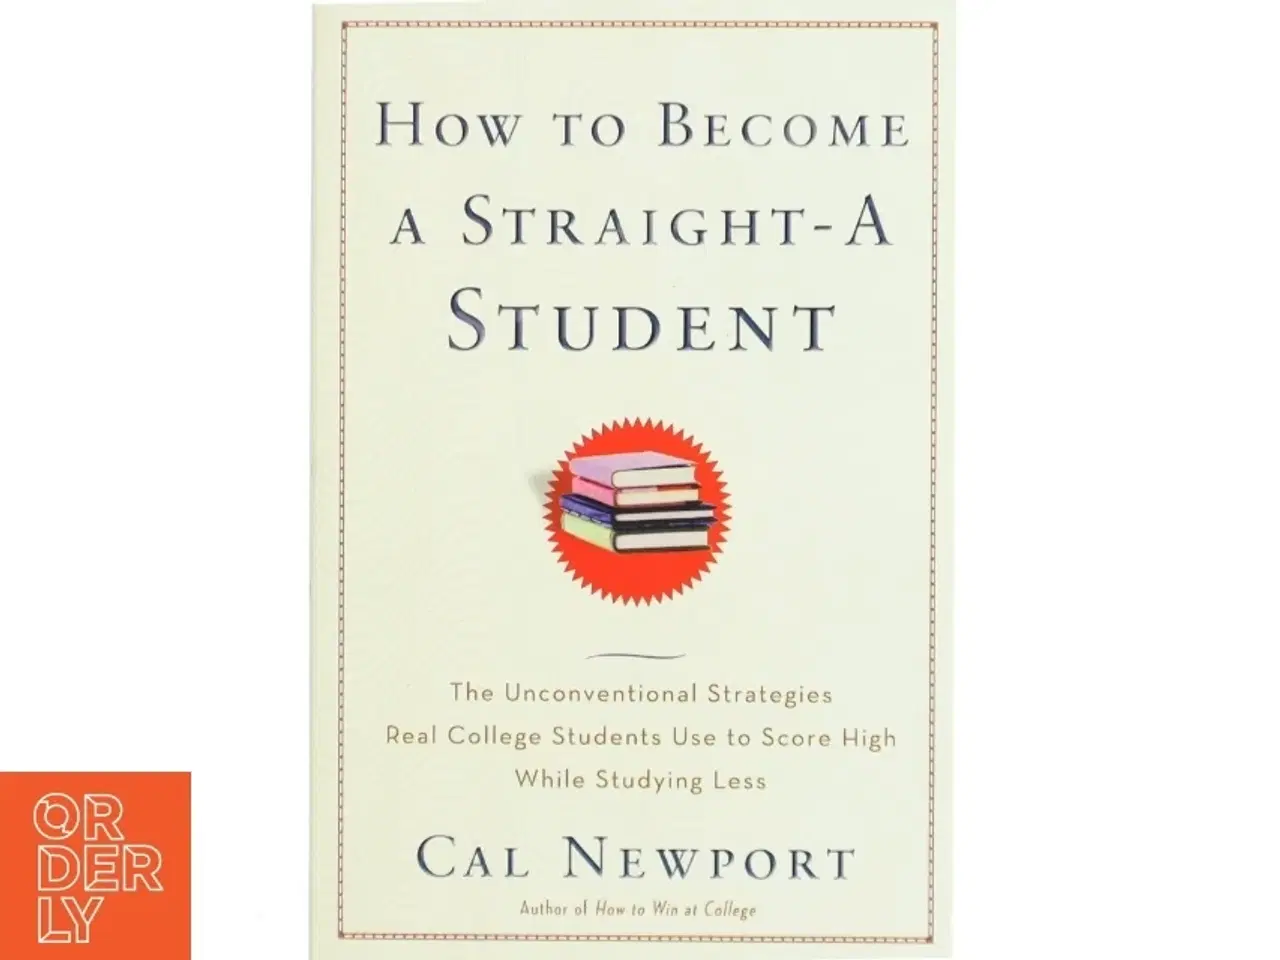 Billede 1 - How to become a straight-A student : the unconventional strategies real college students use to score high while studying less af Cal Newport (Bog)